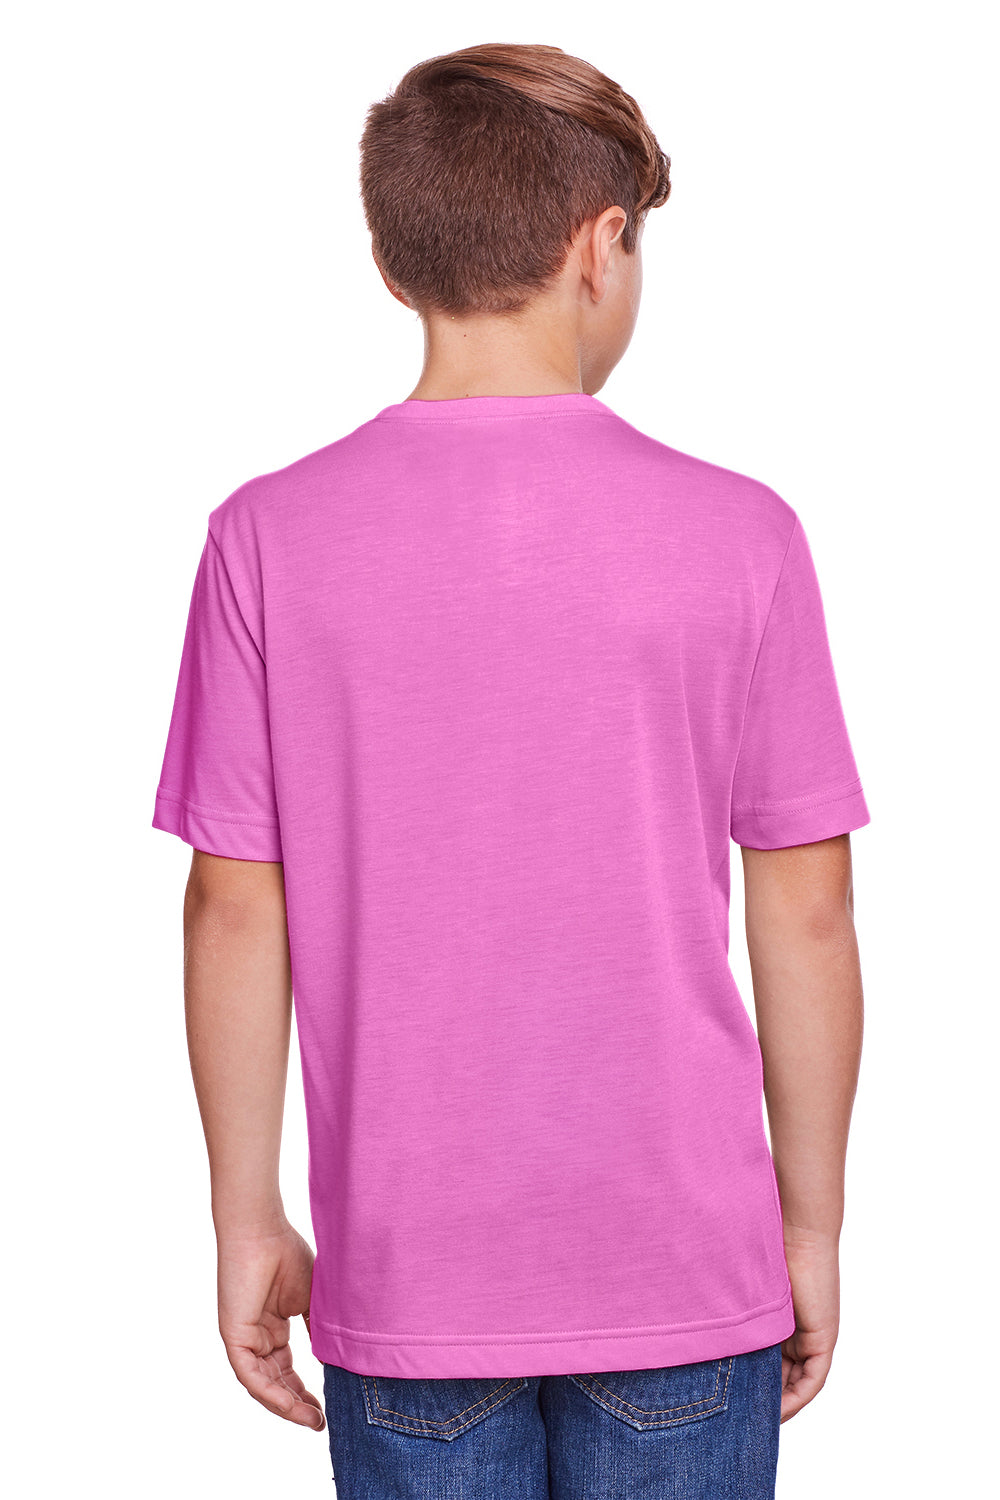 Core 365 CE111Y Youth Fusion ChromaSoft Performance Moisture Wicking Short Sleeve Crewneck T-Shirt Charity Pink Back